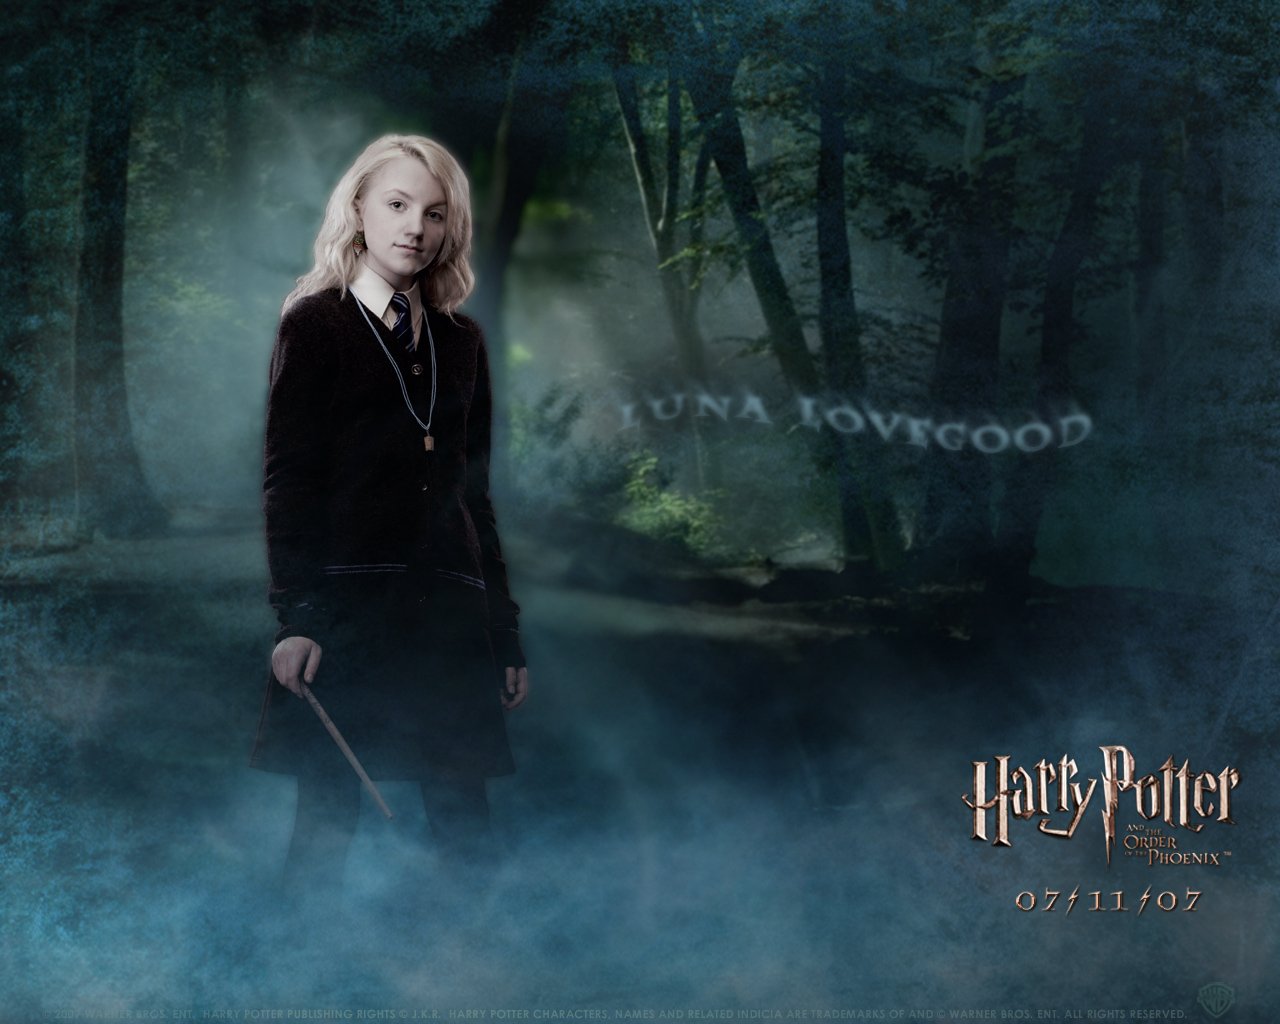 luna lovegood, movie, harry potter and the order of the phoenix